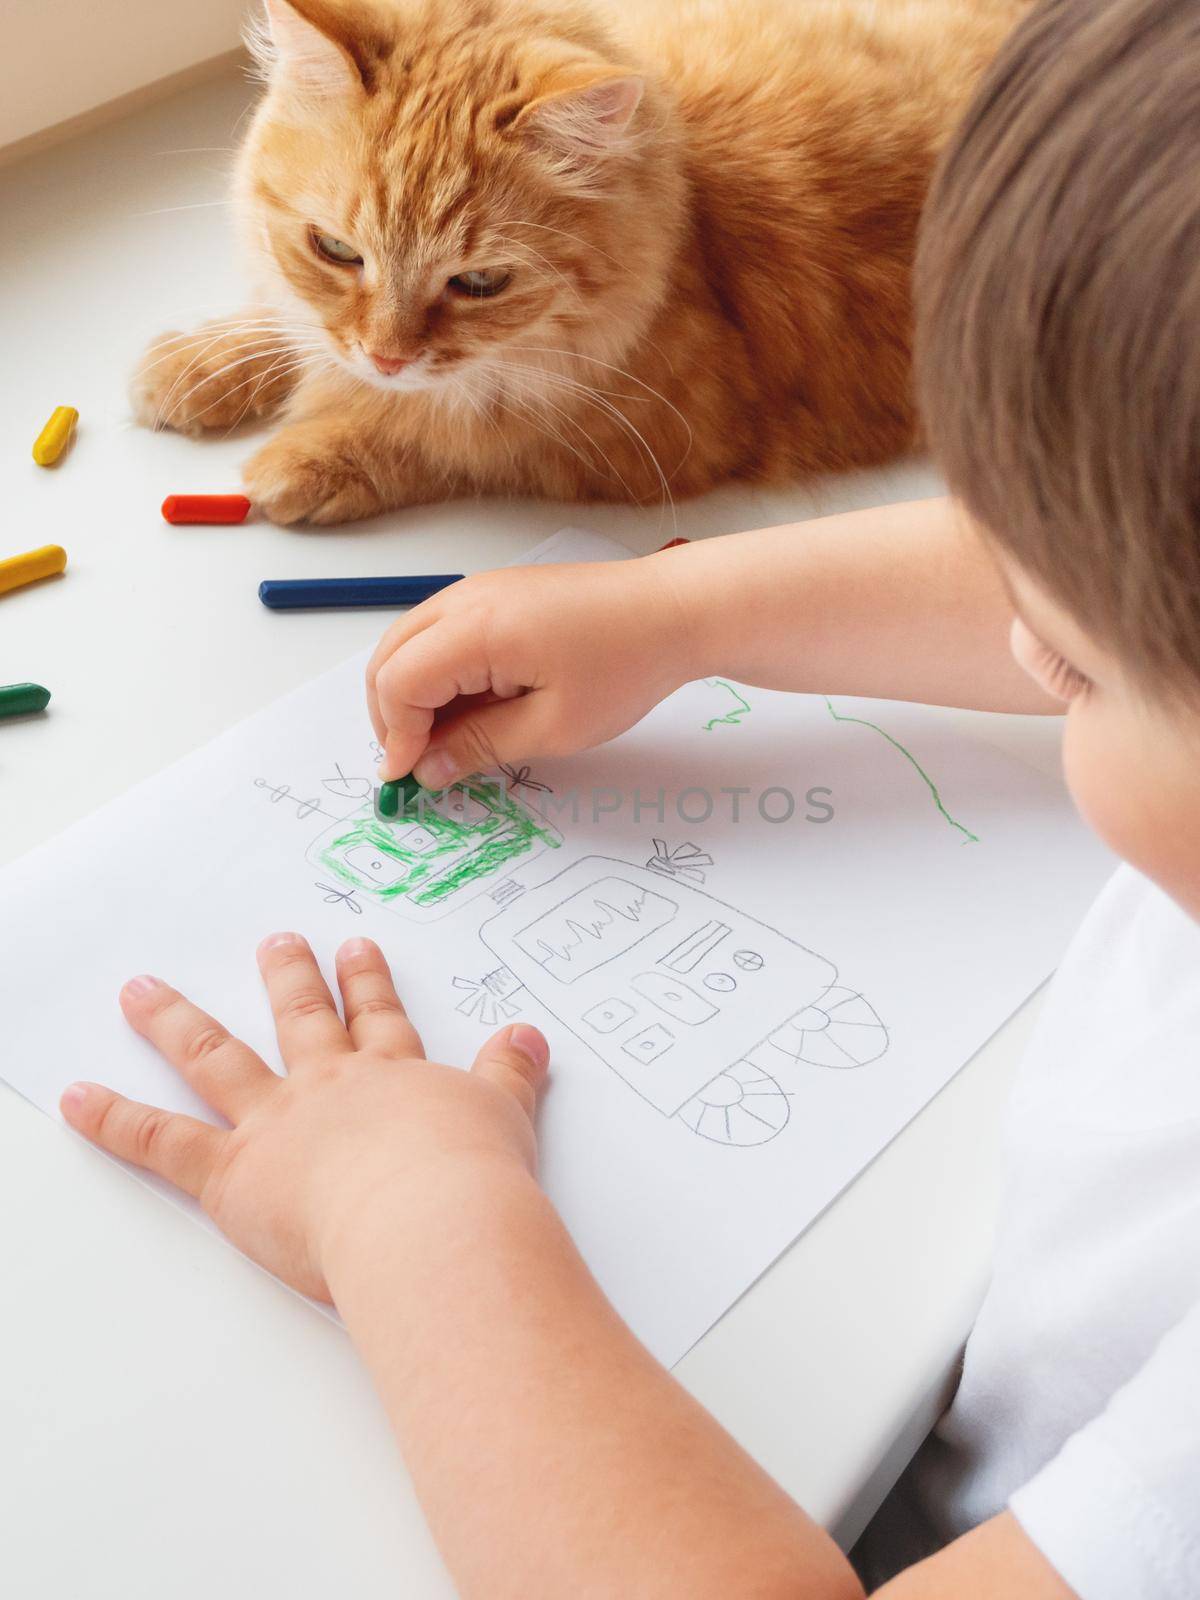 Toddler draws colorful robot. Kid uses wax crayons to paint it. Cute ginger cat lies on window sill with child. Coloring pages to train fine motor skills.